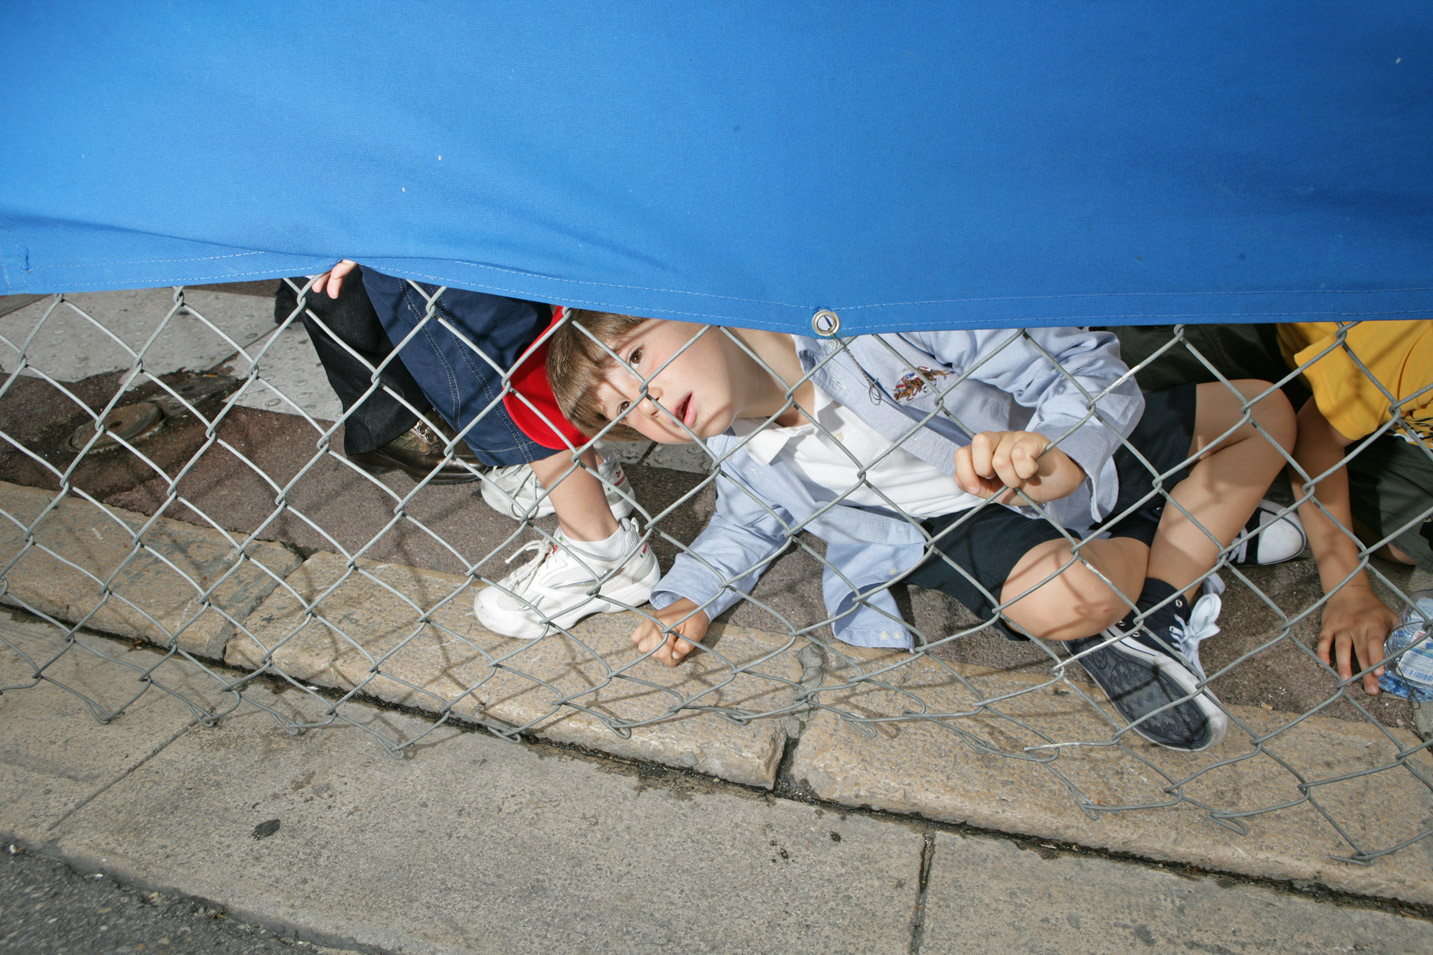 A young fan peeks under the fence to watch the action